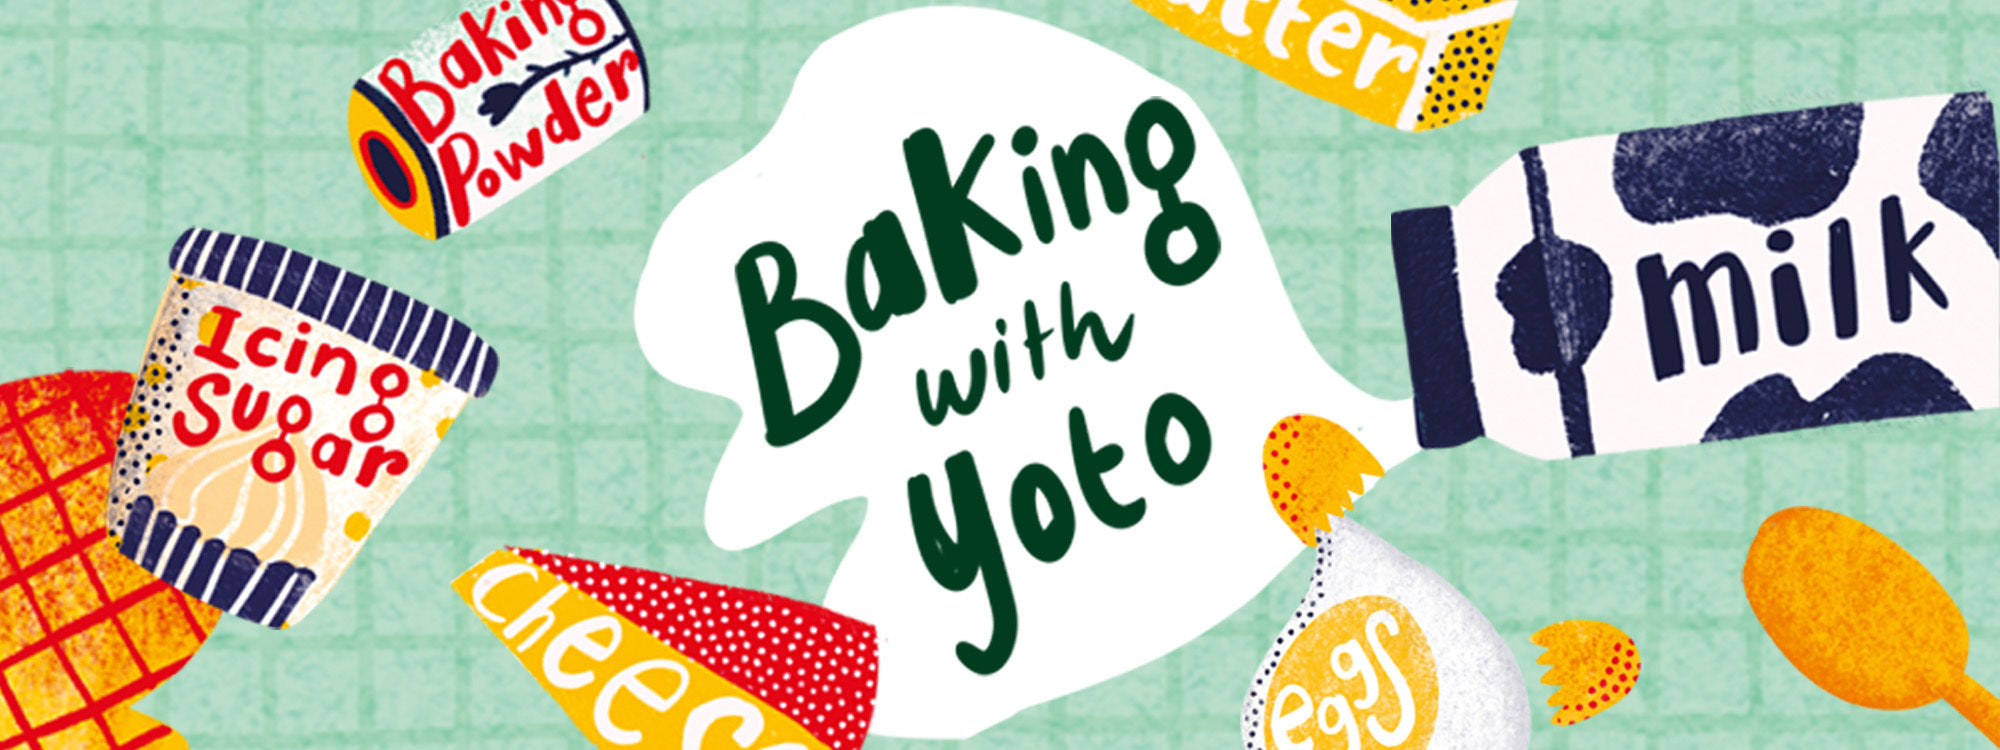 Get Baking with Yoto, with tips from the Little Cooks Co.